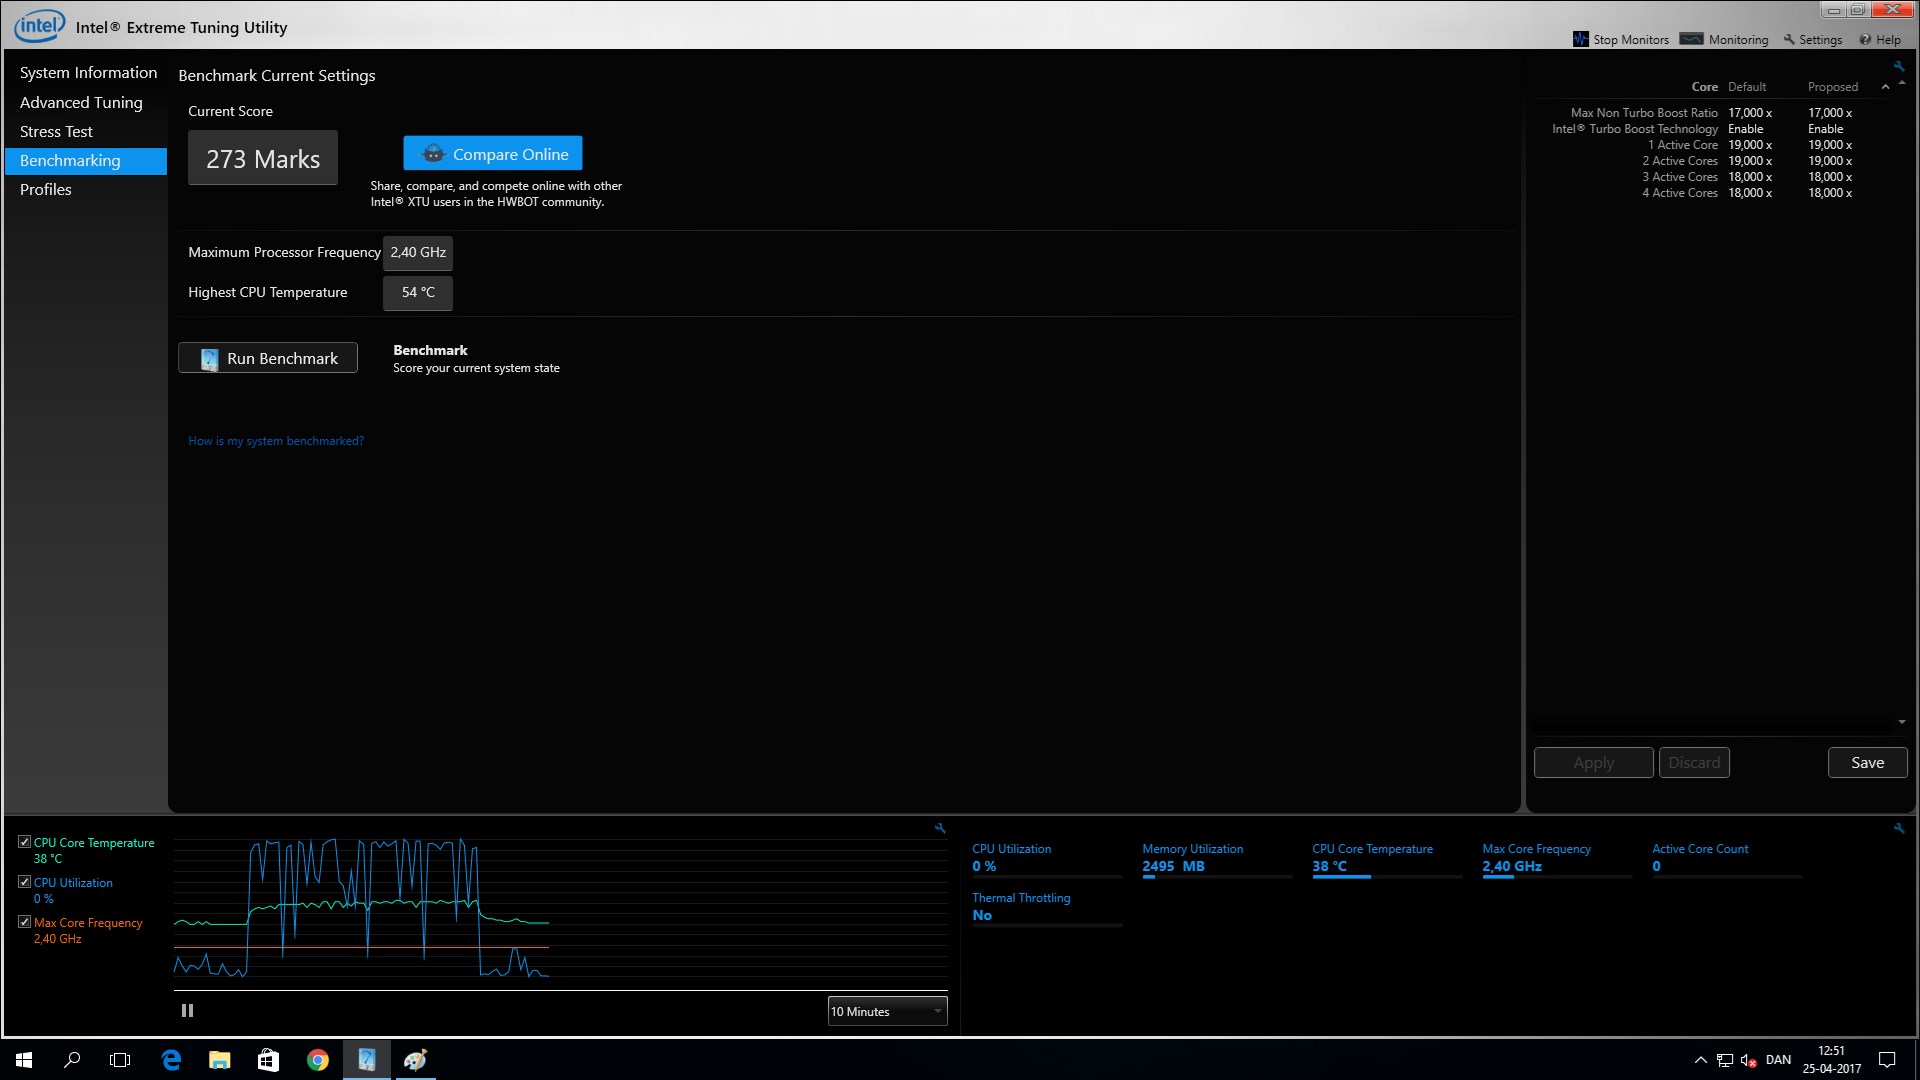 Turbo Boost Turbo Boost Driver. Intel extreme Tuning Utility. Turbo Boost Test compare. Turbo Boost Test.